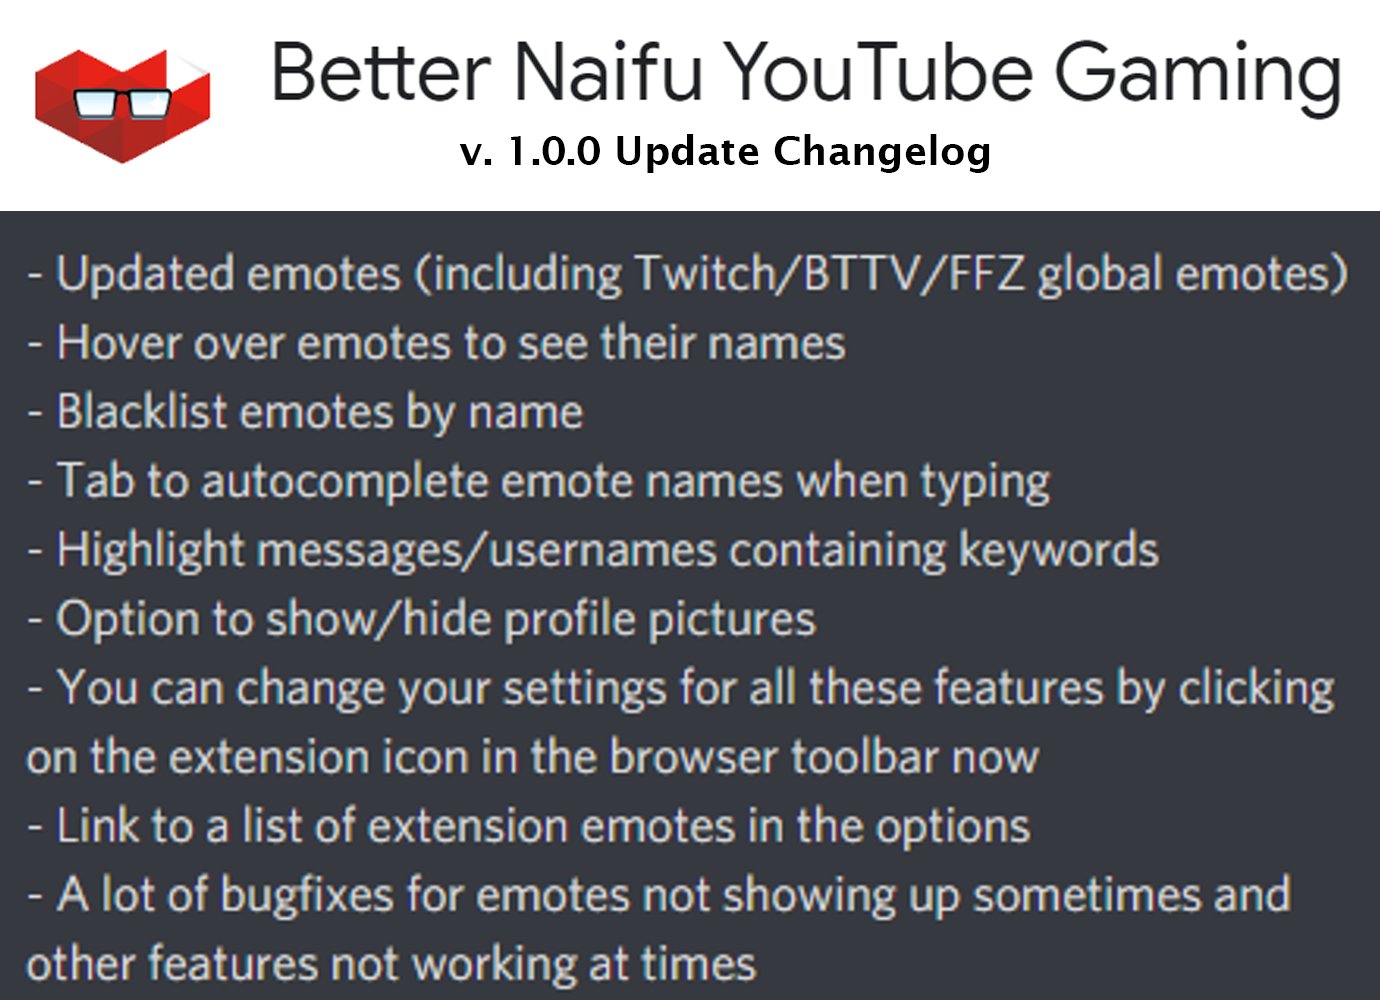 Nairomk Stream The Better Naifu Youtube Gaming Extension For Google Chrome Has Been Updated To 1 0 0 Firefox Version Coming Soon You Can Download The Extension At T Co U0dypox8kk Changelog T Co 2kiigaalzg